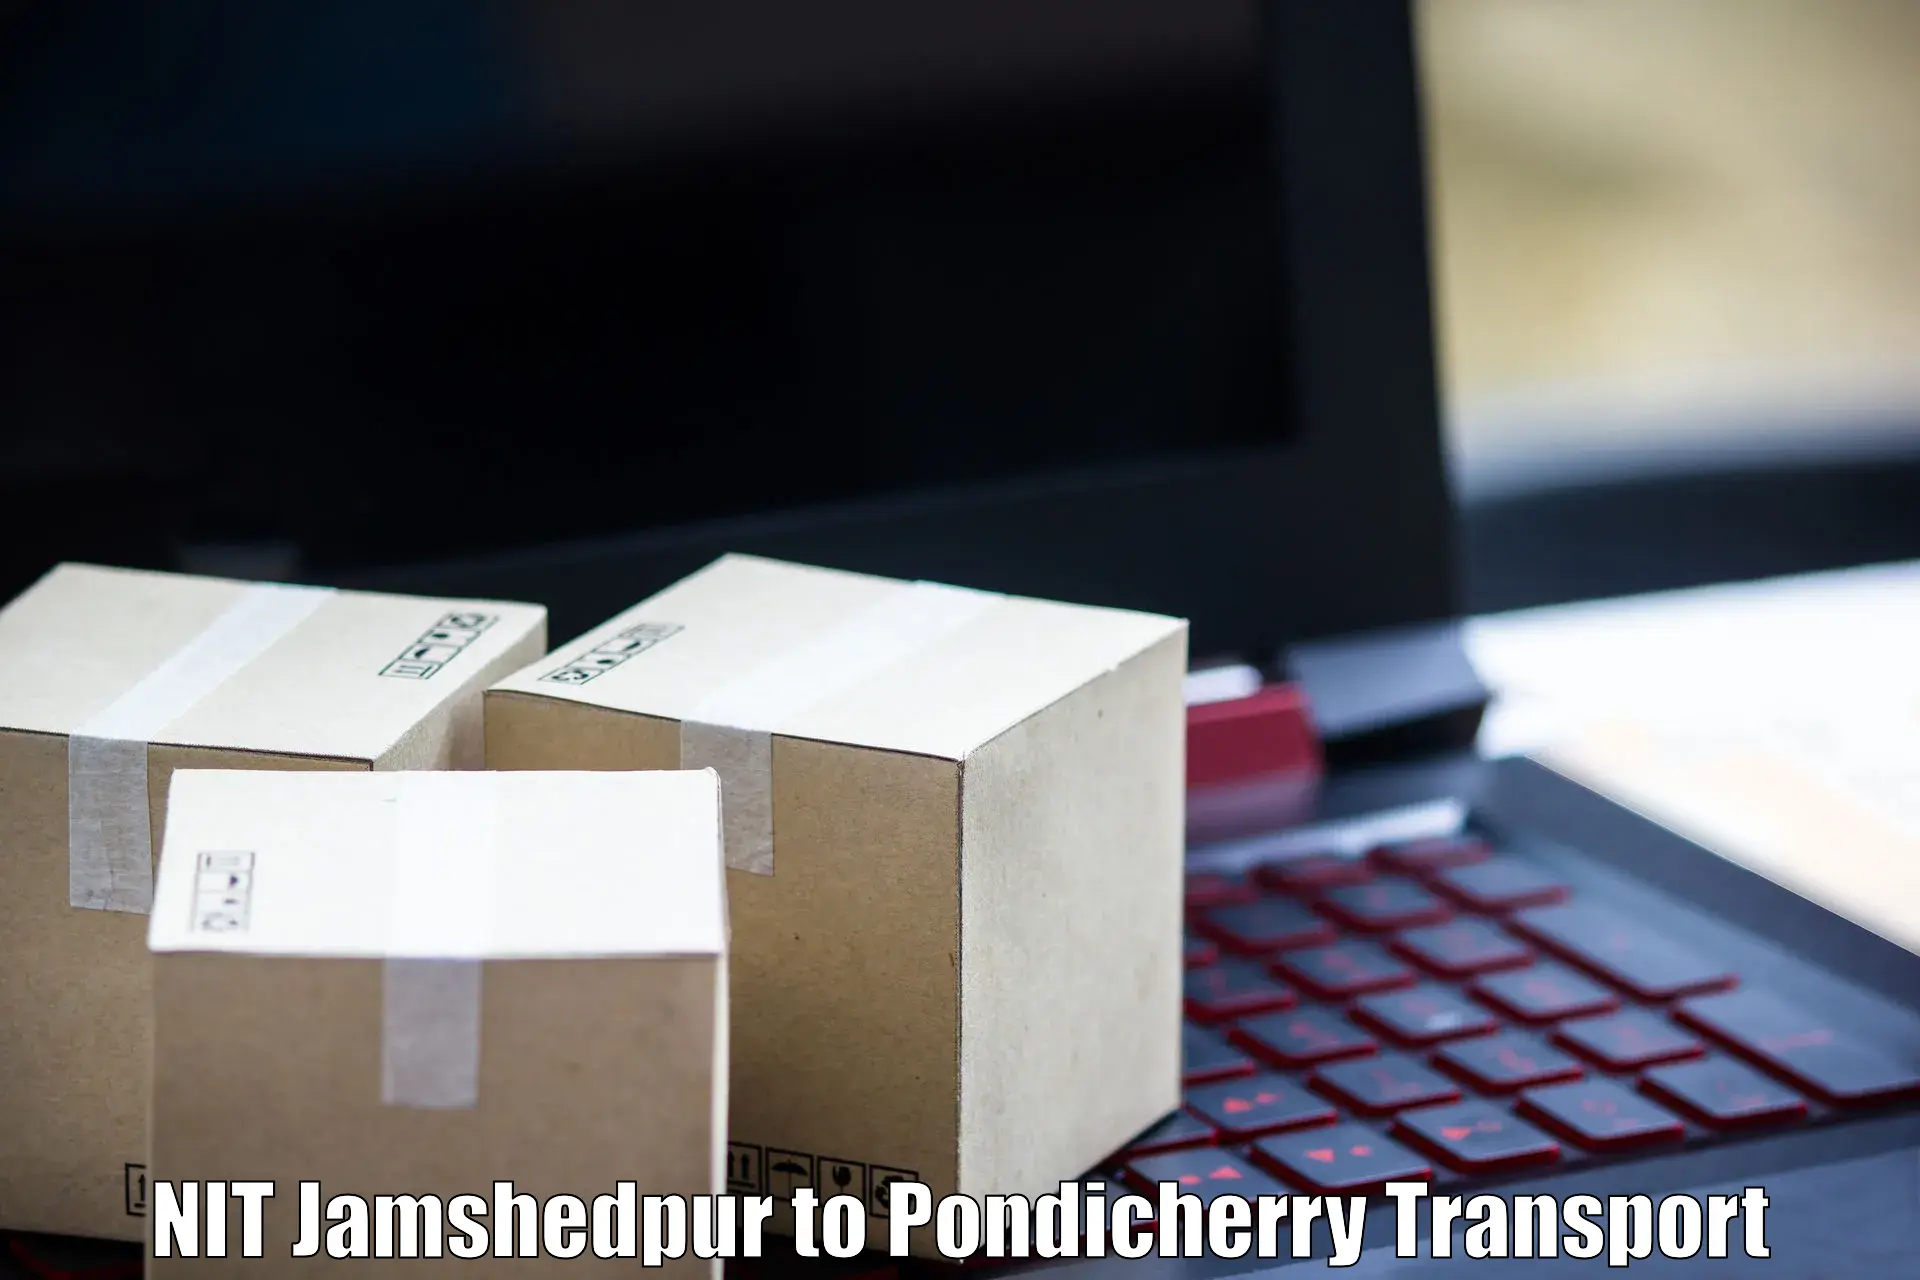 Material transport services NIT Jamshedpur to Pondicherry